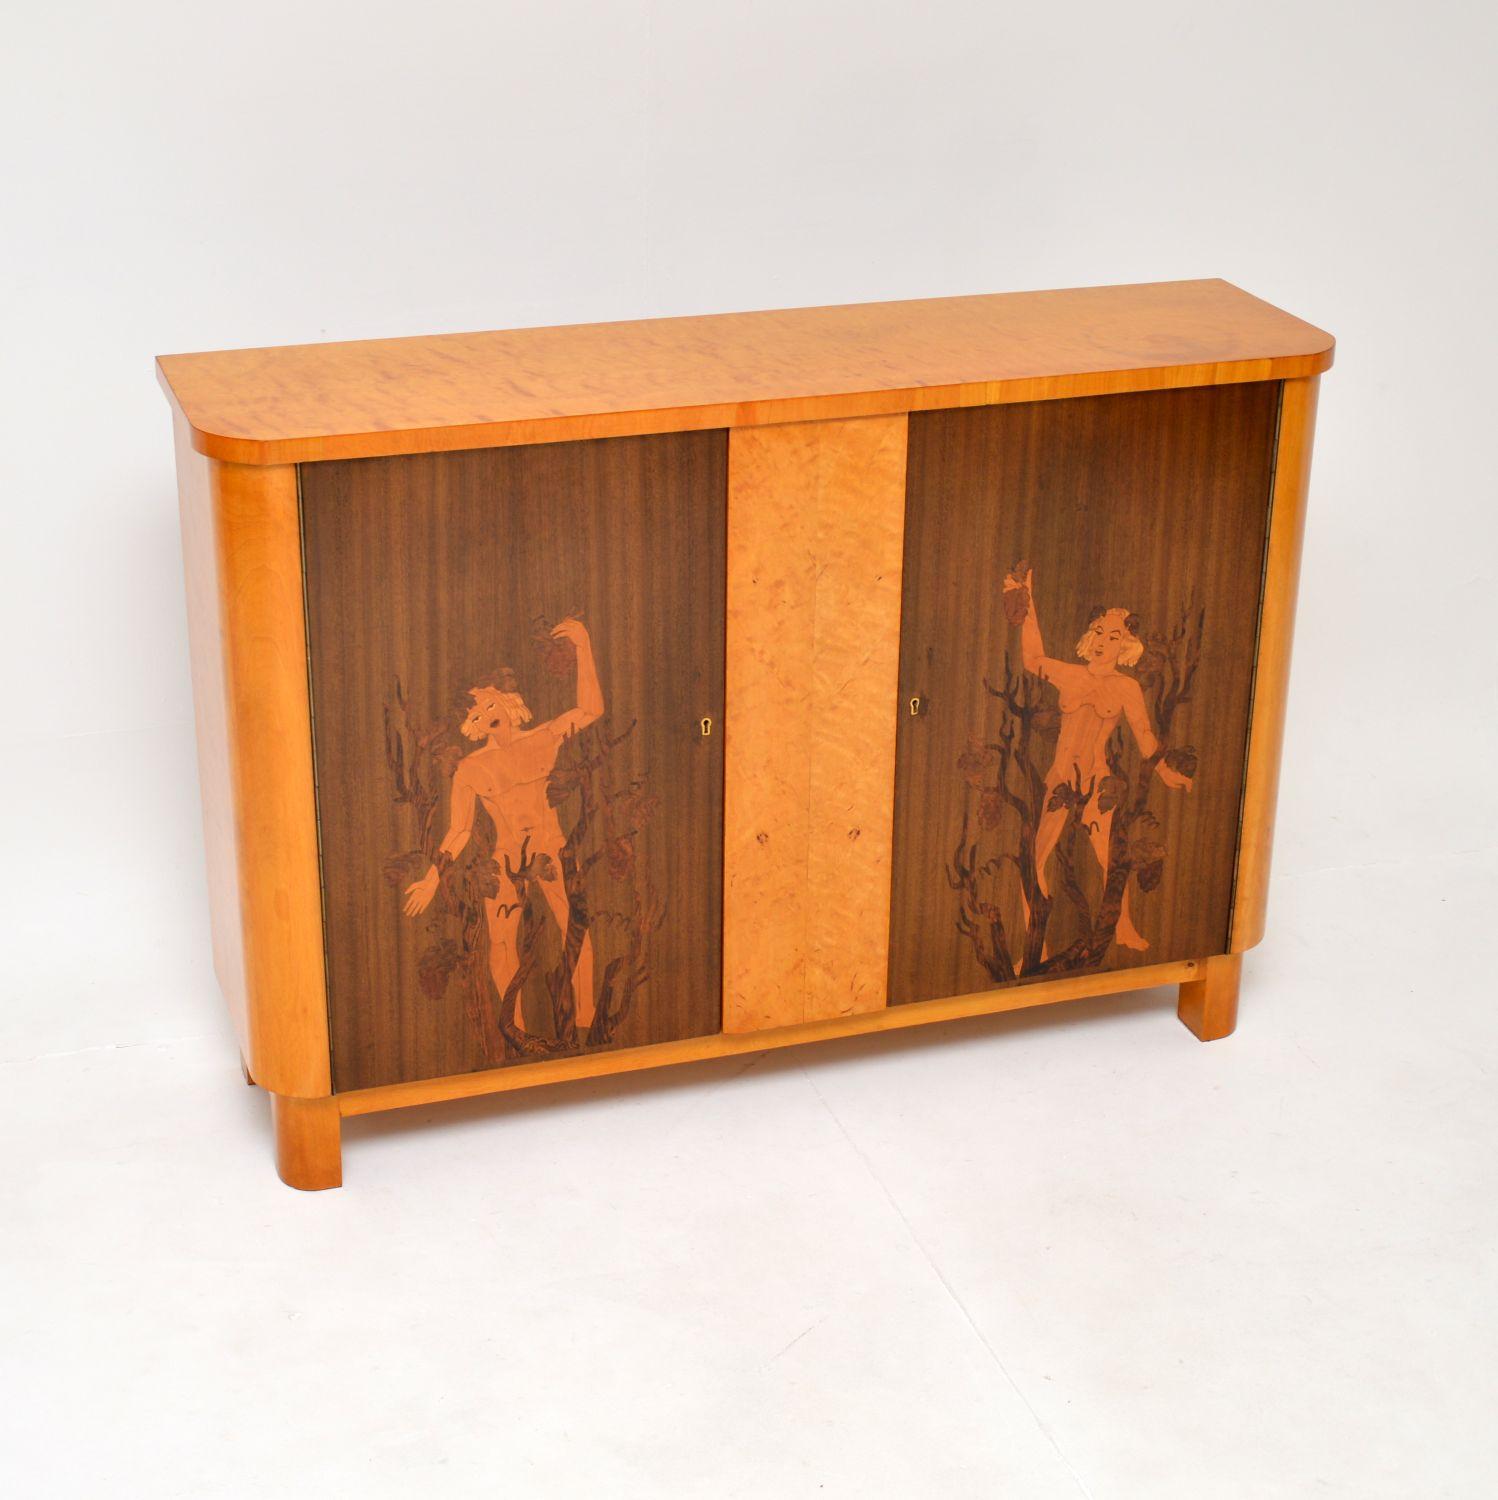 A stunning antique Swedish inlaid satin birch cabinet, dating from the 1920’s.

This is of outstanding quality, it is beautifully made and is a very useful size. It is predominantly satin birch, the doors are walnut and have inlays of various woods,